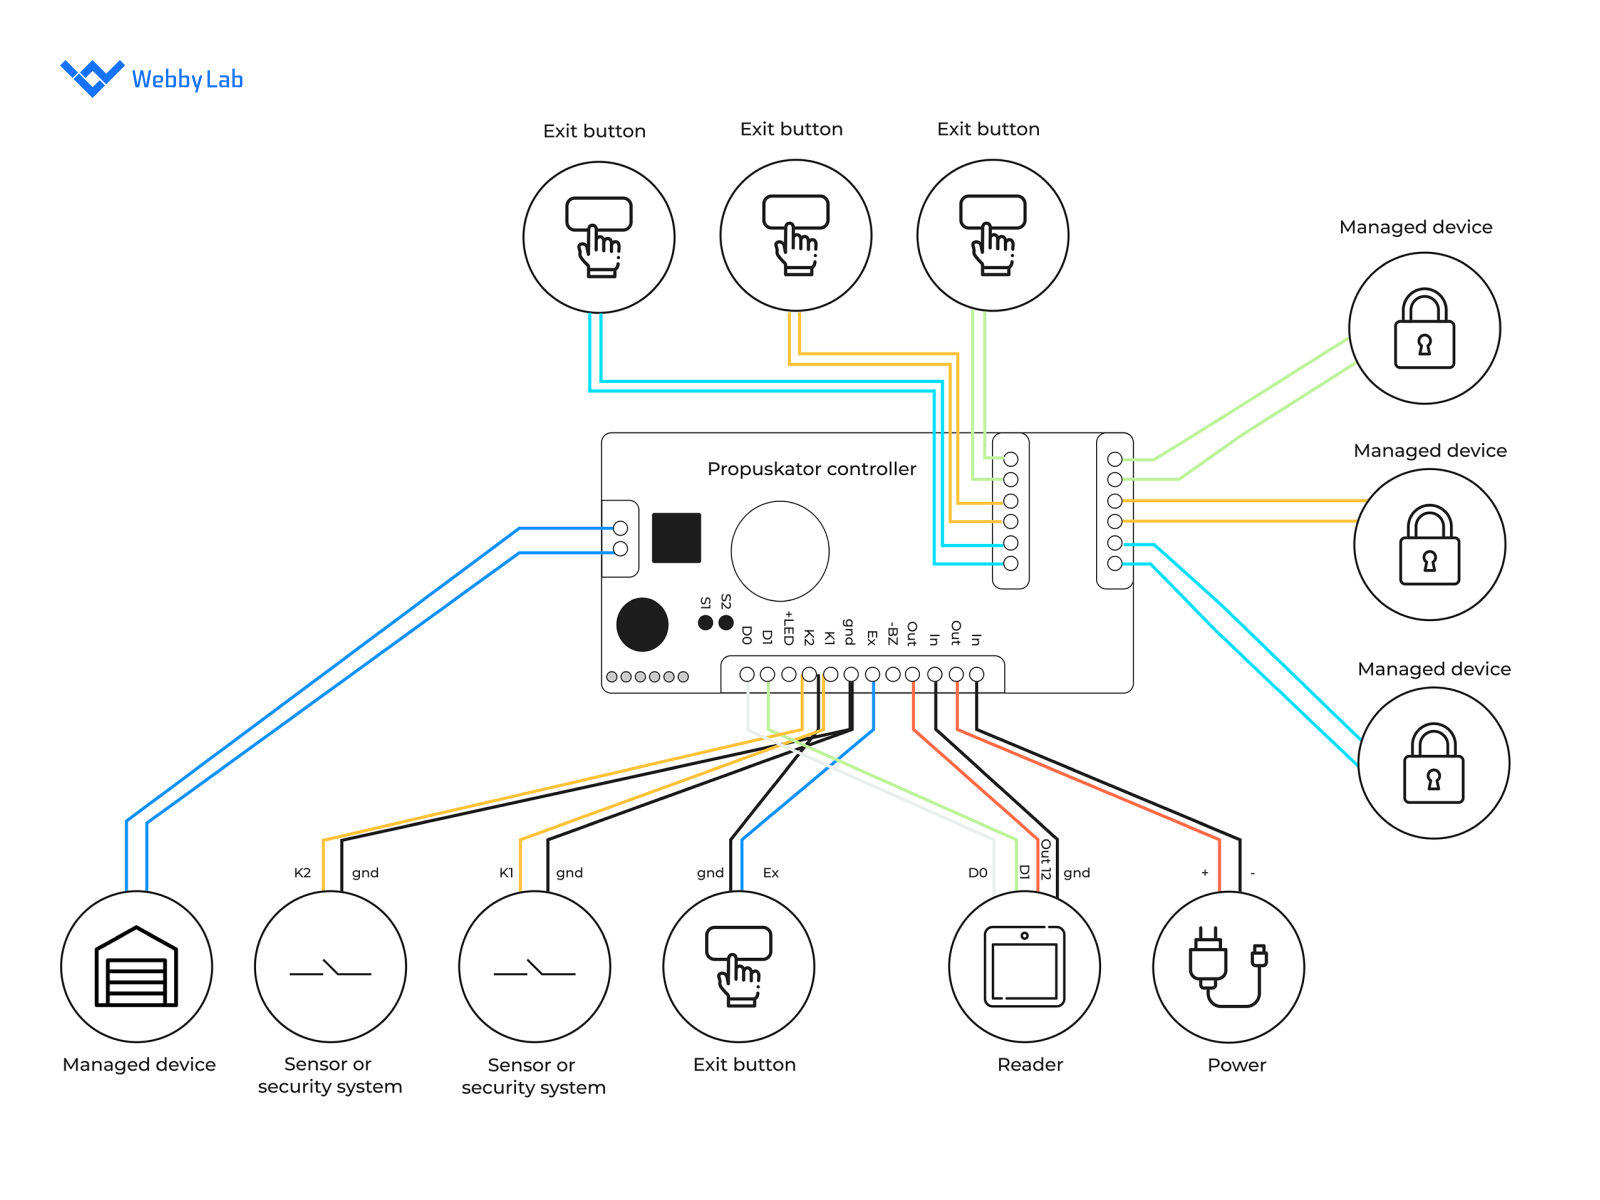 The scheme of a universal controller in the access control system, Propuskator, made by WebbyLab